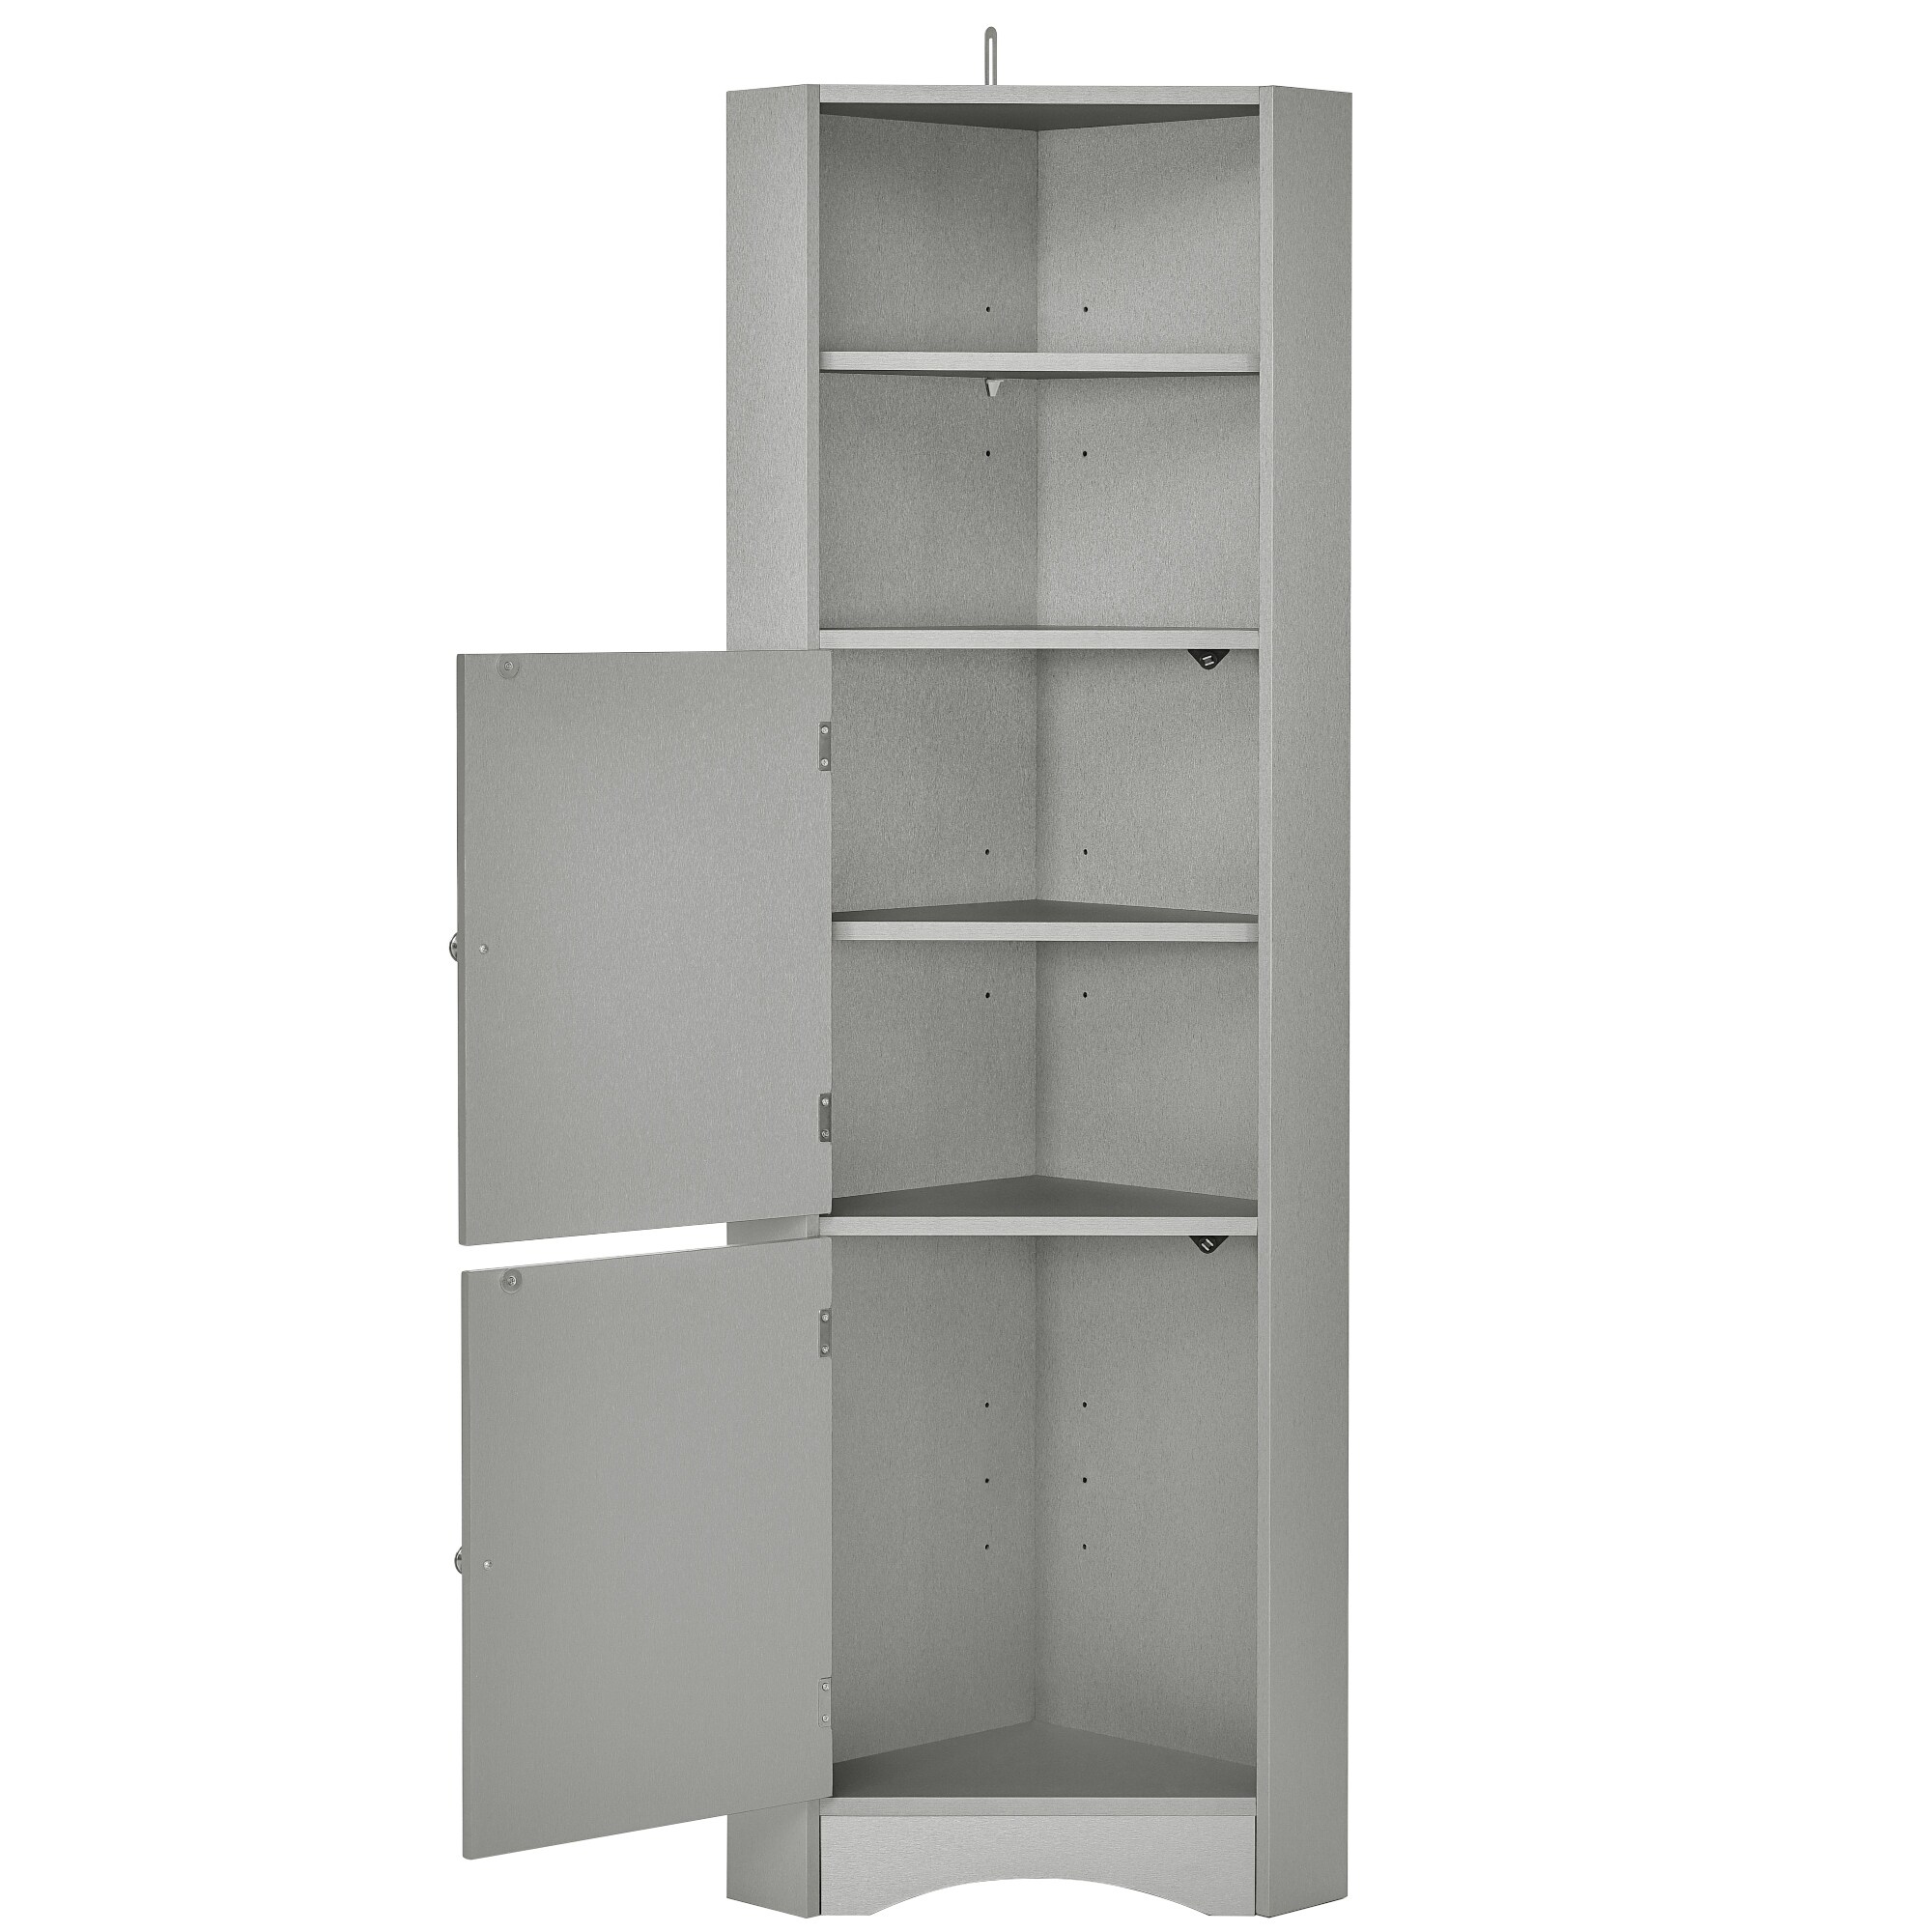 https://ak1.ostkcdn.com/images/products/is/images/direct/341cbc8b6949b5d133c2aeaf99db4567e9f08e09/Bathroom-Corner-Cabinet-with-Doors-and-Adjustable-Shelves.jpg